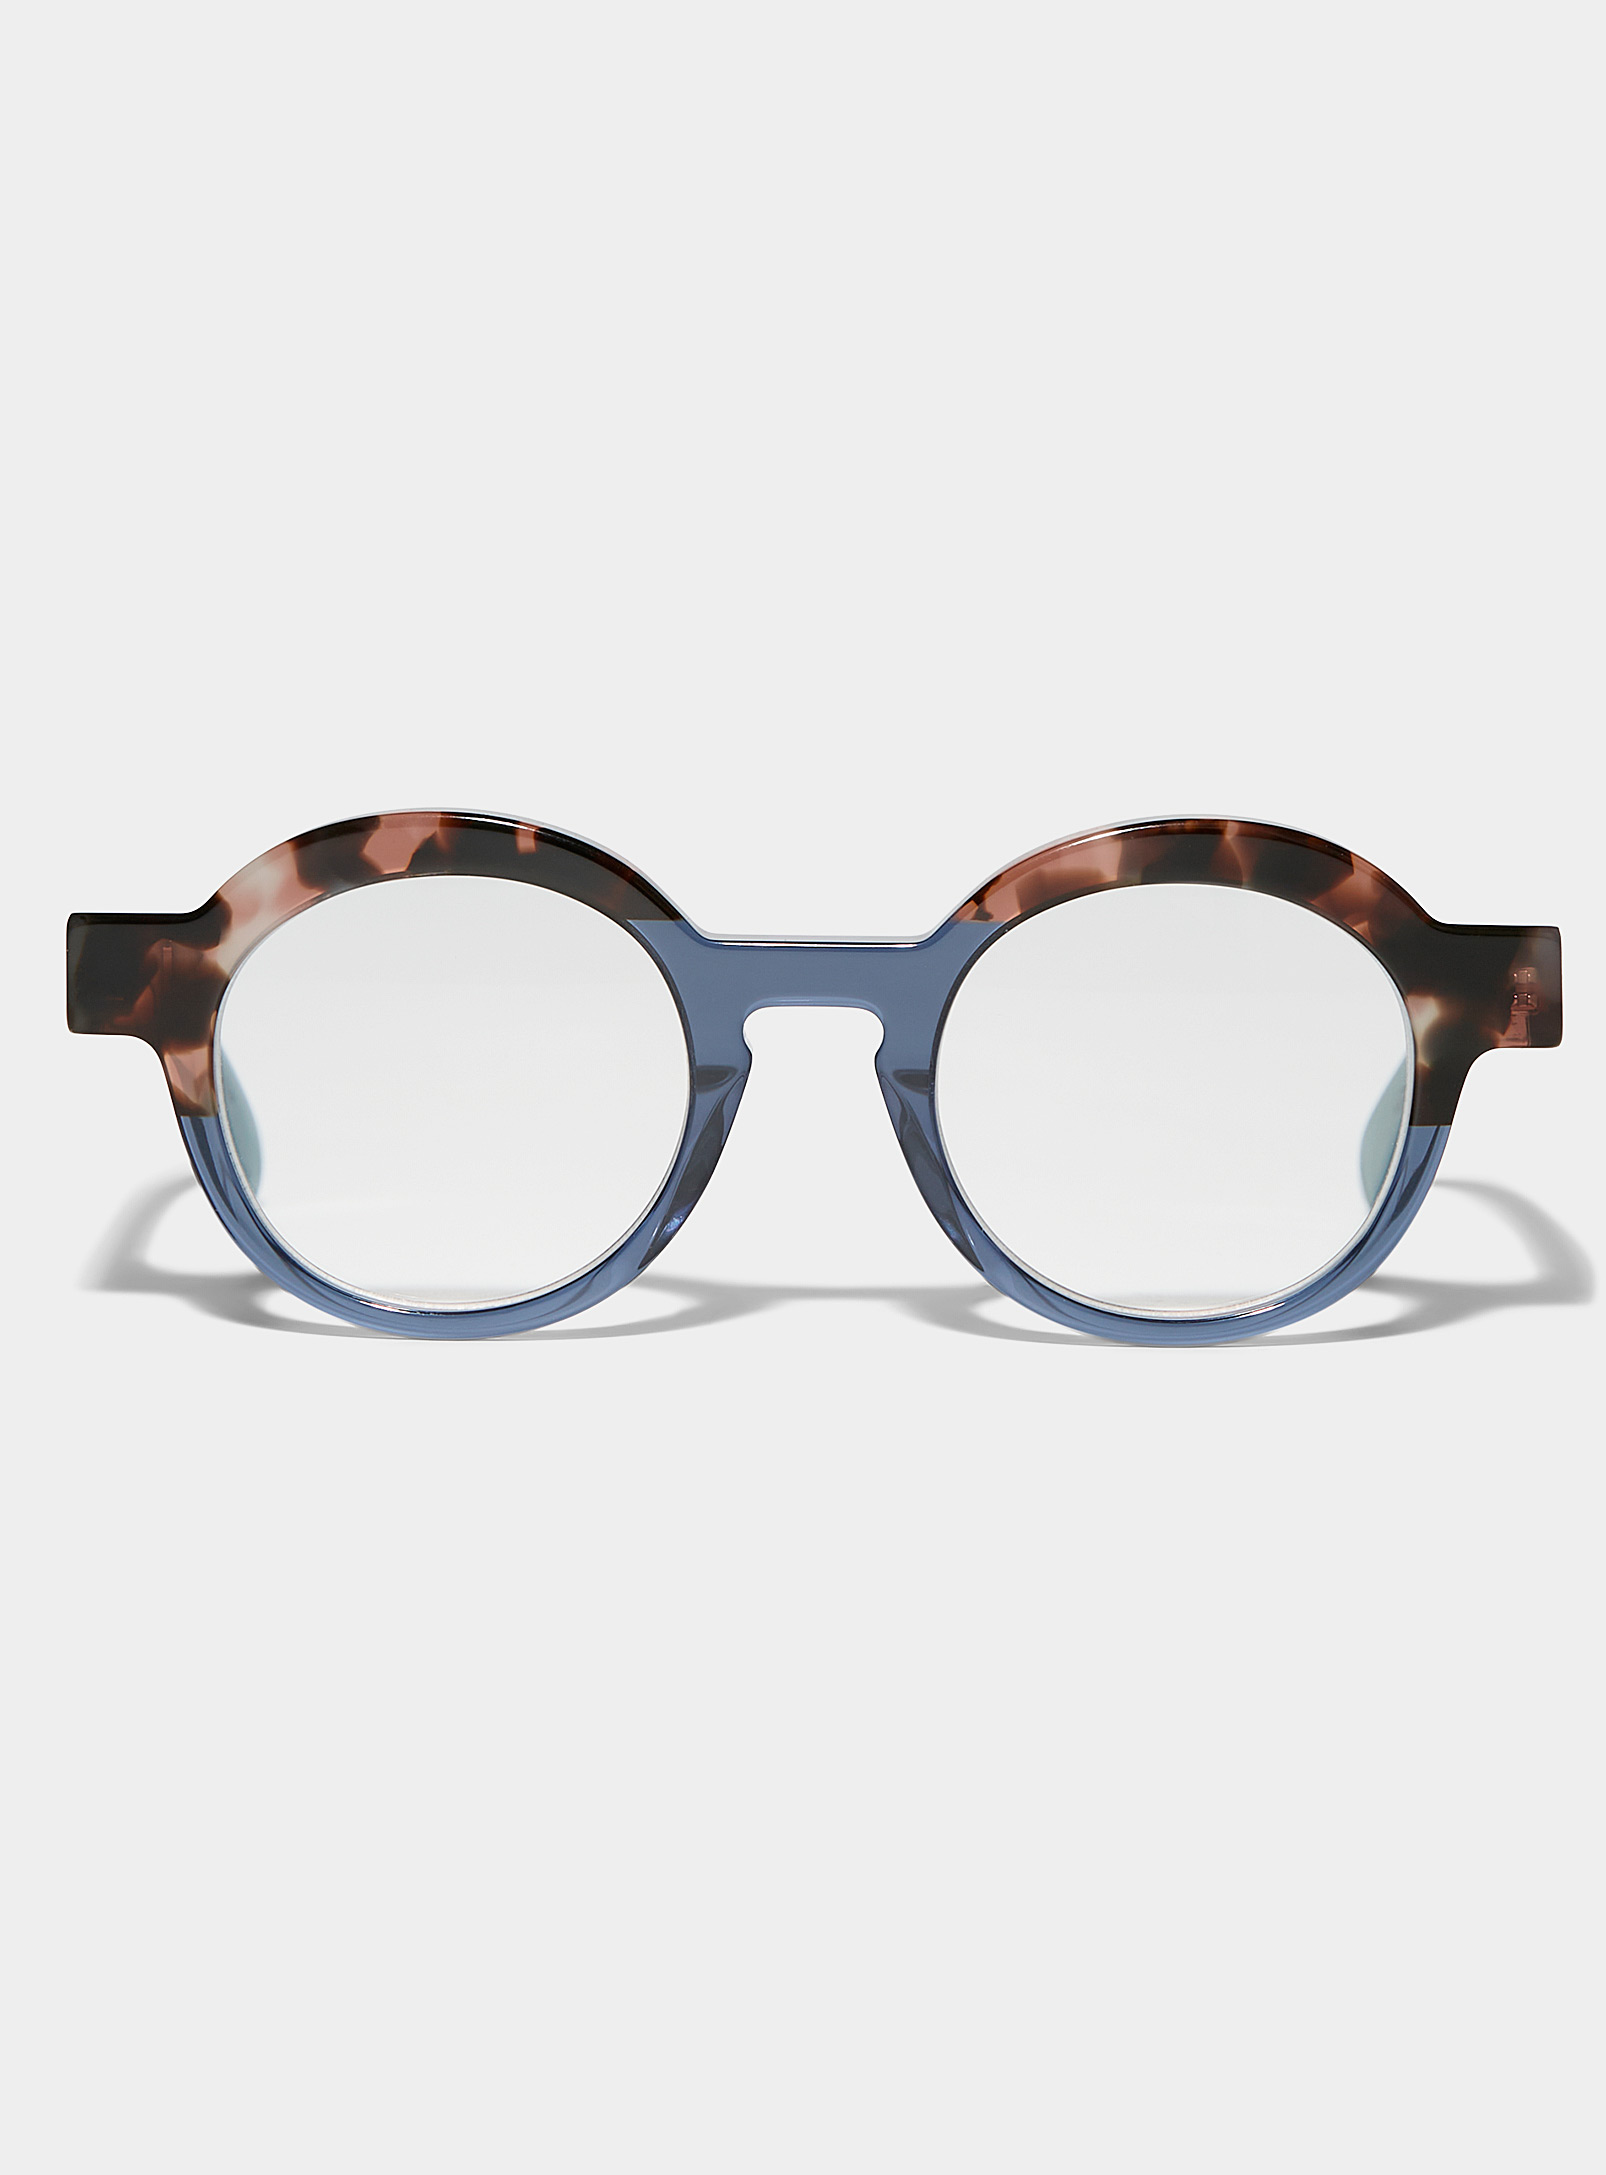 French Kiwis Charlotte Reading Glasses In Baby Blue